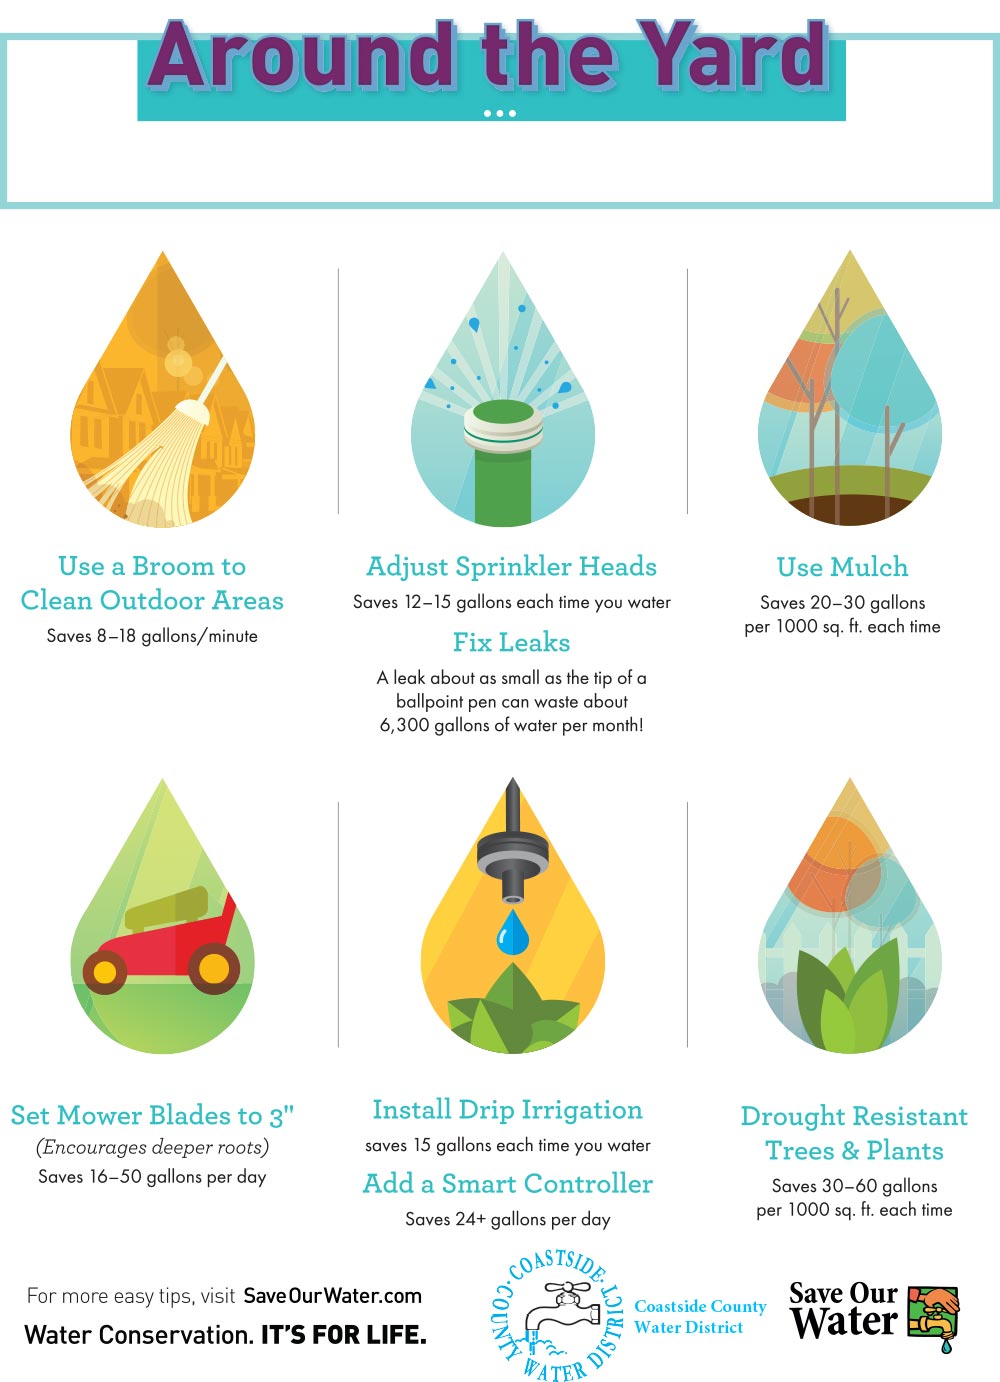 Around the Yard water conservation tips